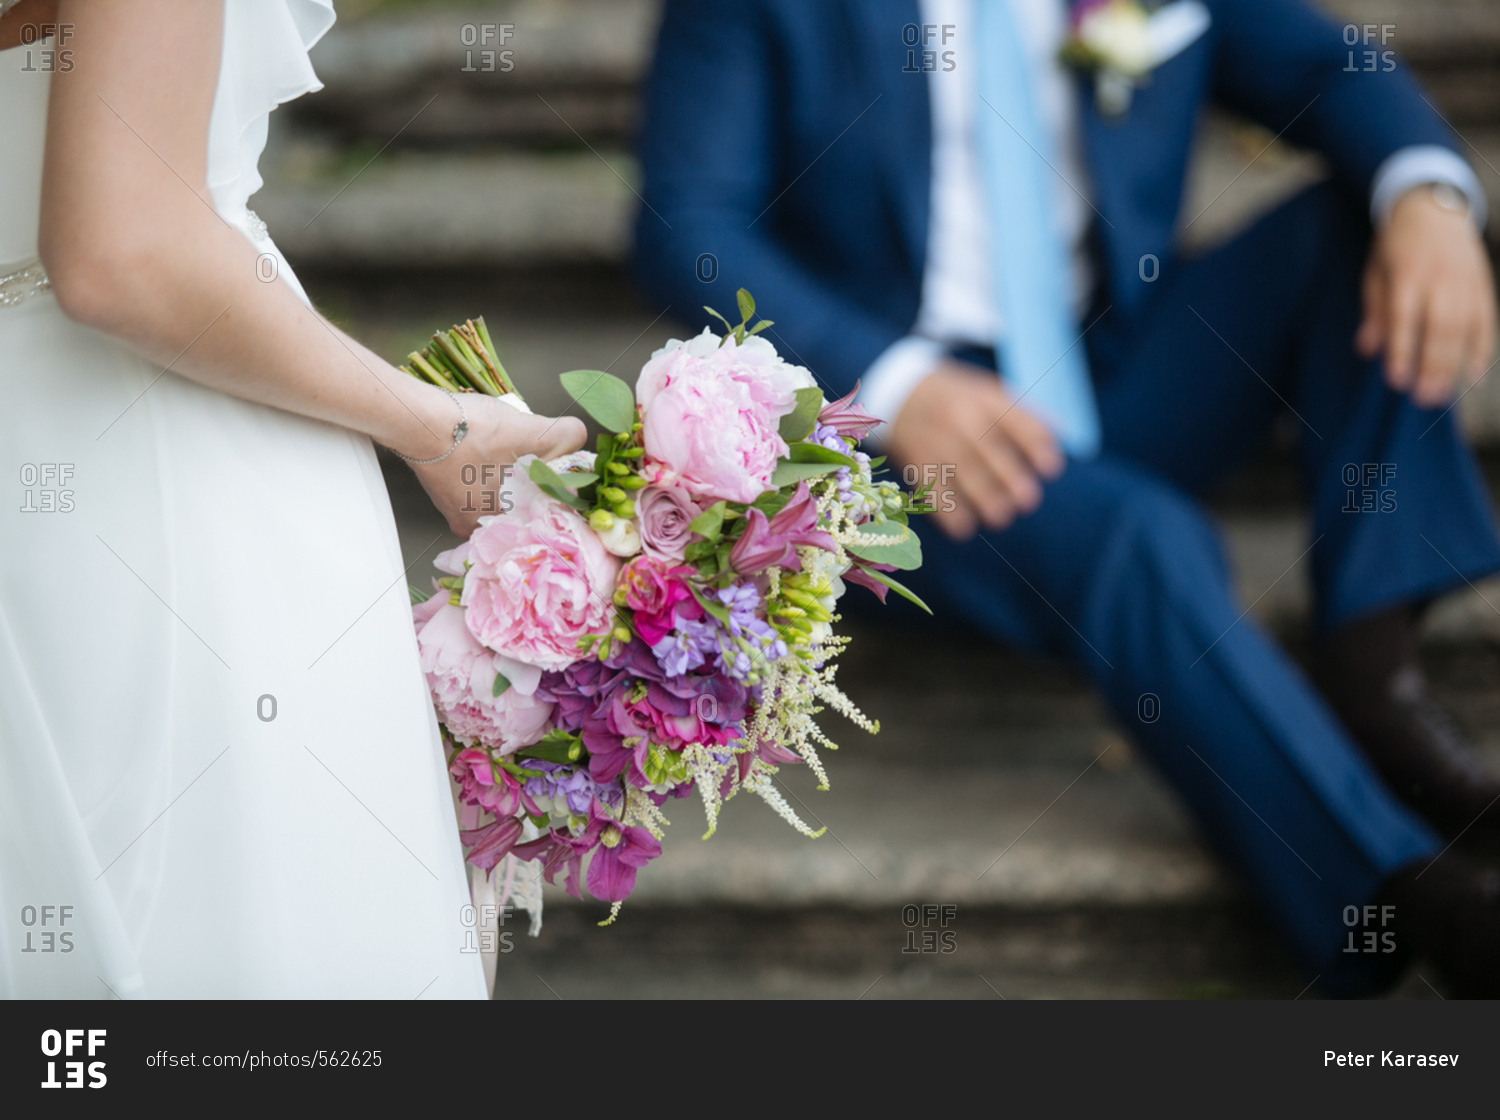 Bride standing in front of her groom holding a bouquet of pink and purple flowers